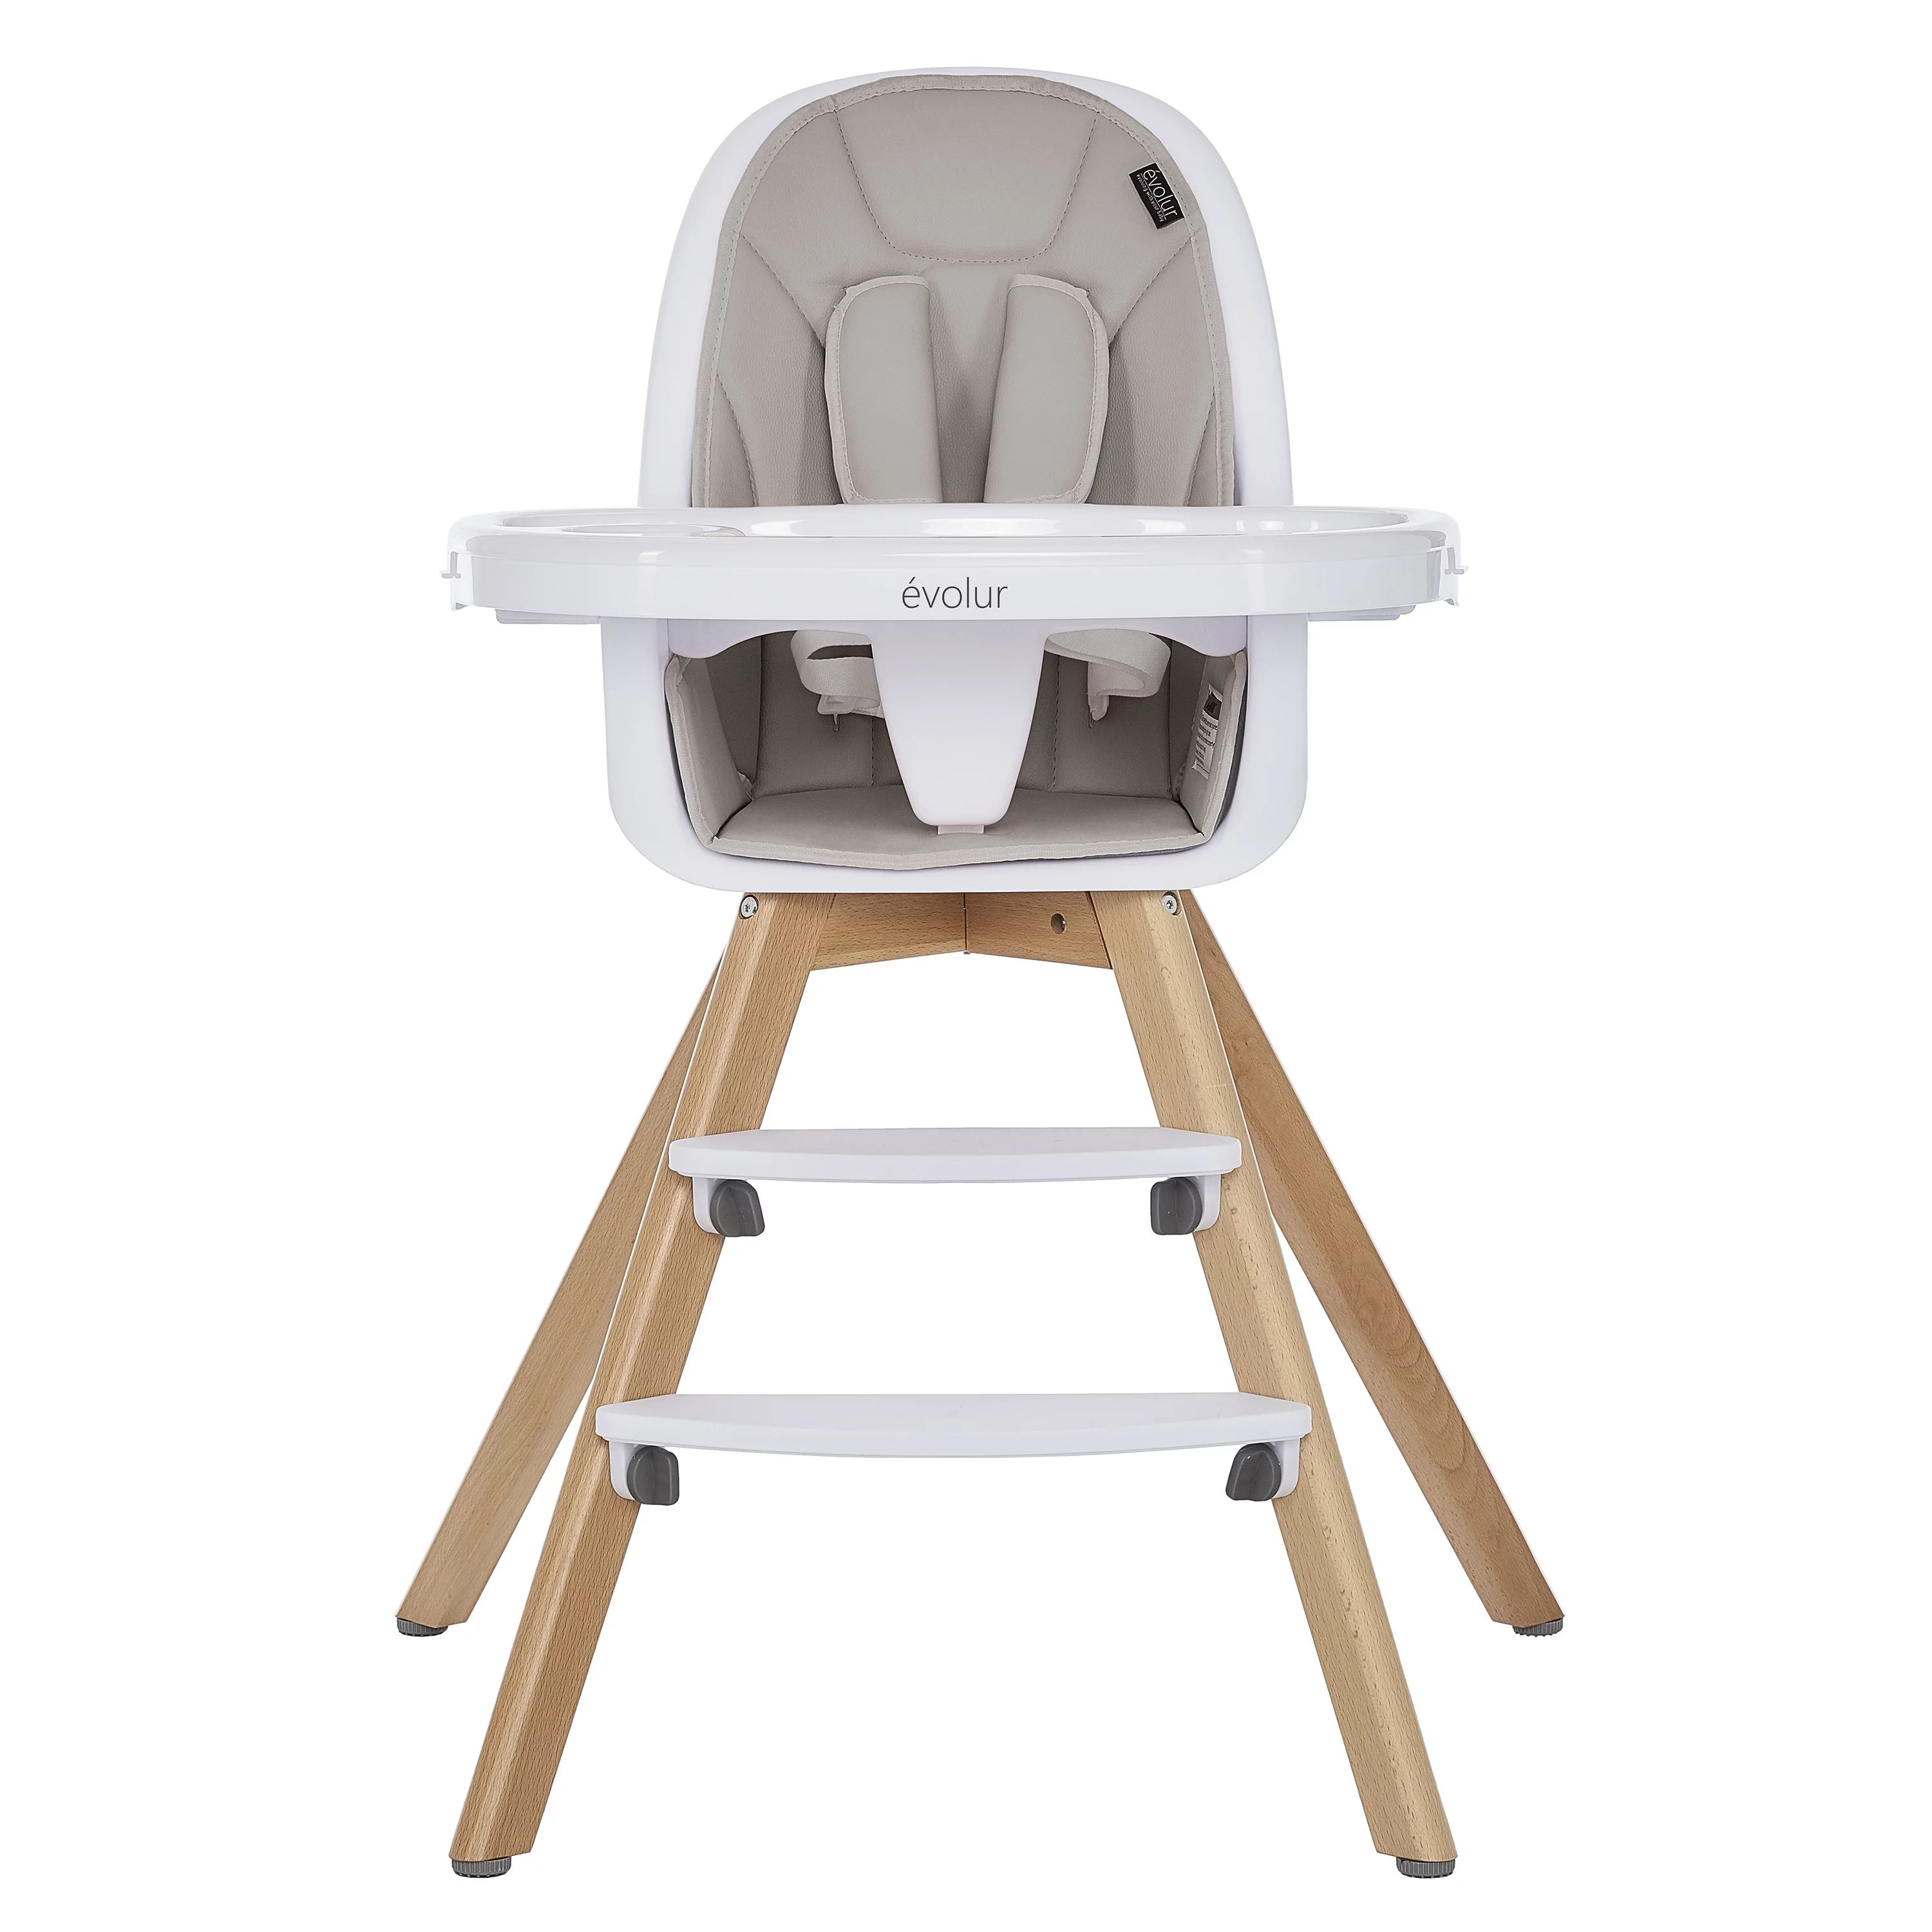 Evolur Zoodle 3-in-1 Highchair Booster Feeding Chair with Modern Design, Light Grey | Walmart (US)